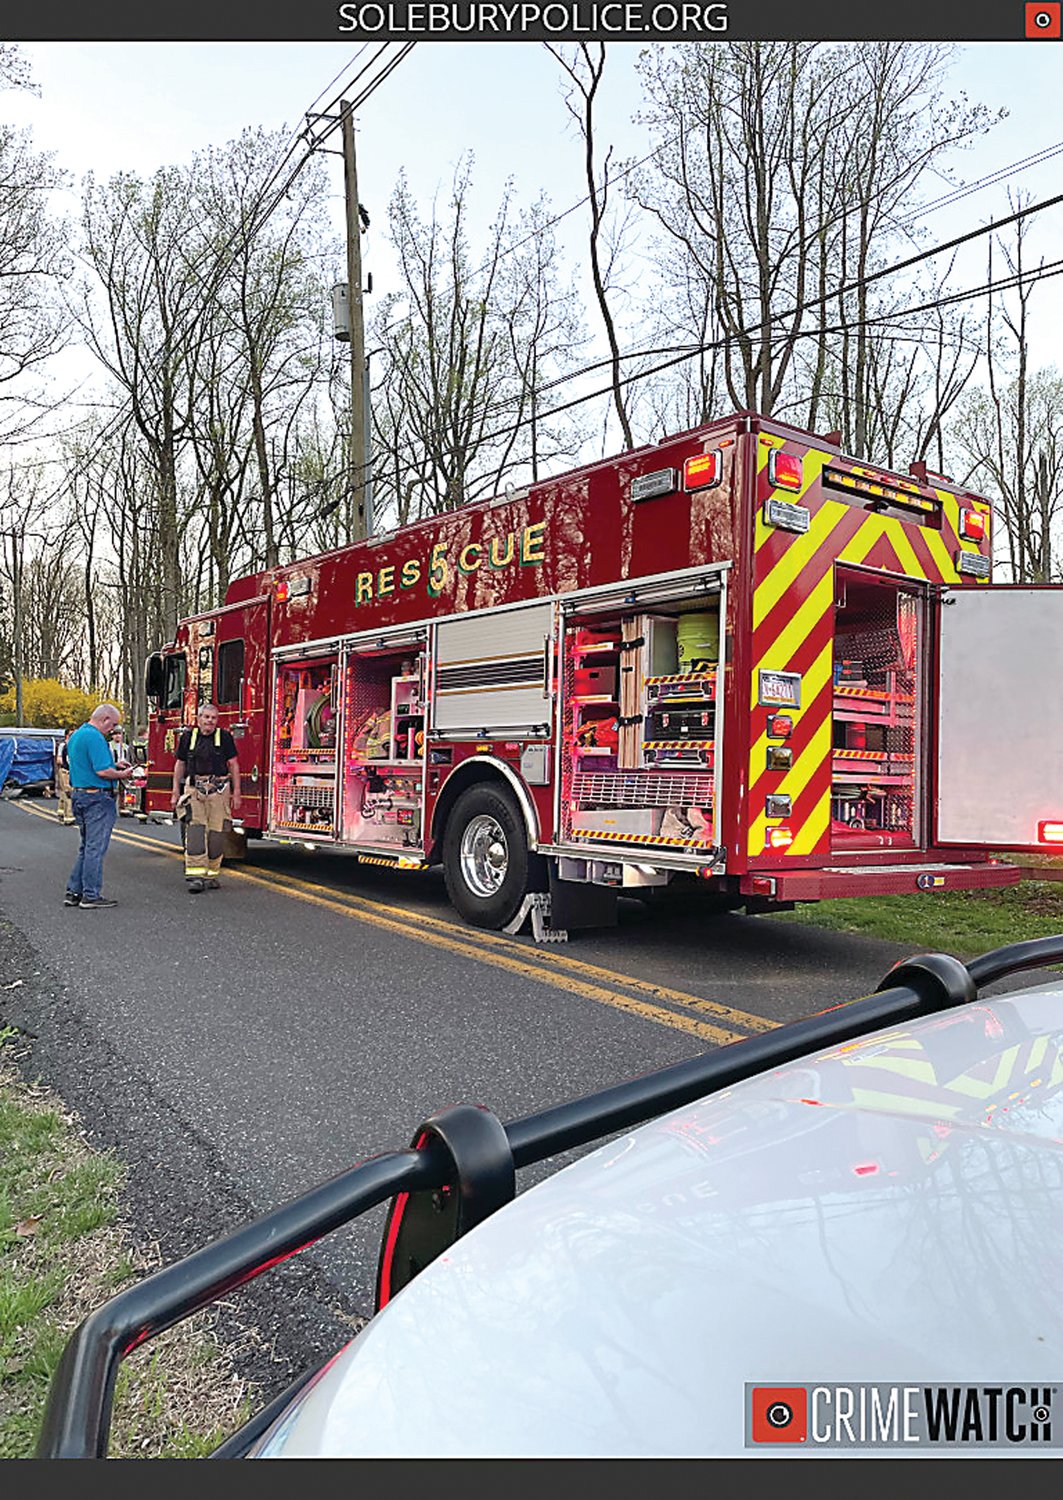 A Midway Fire Co. truck takes part in the rescue effort in Solebury.